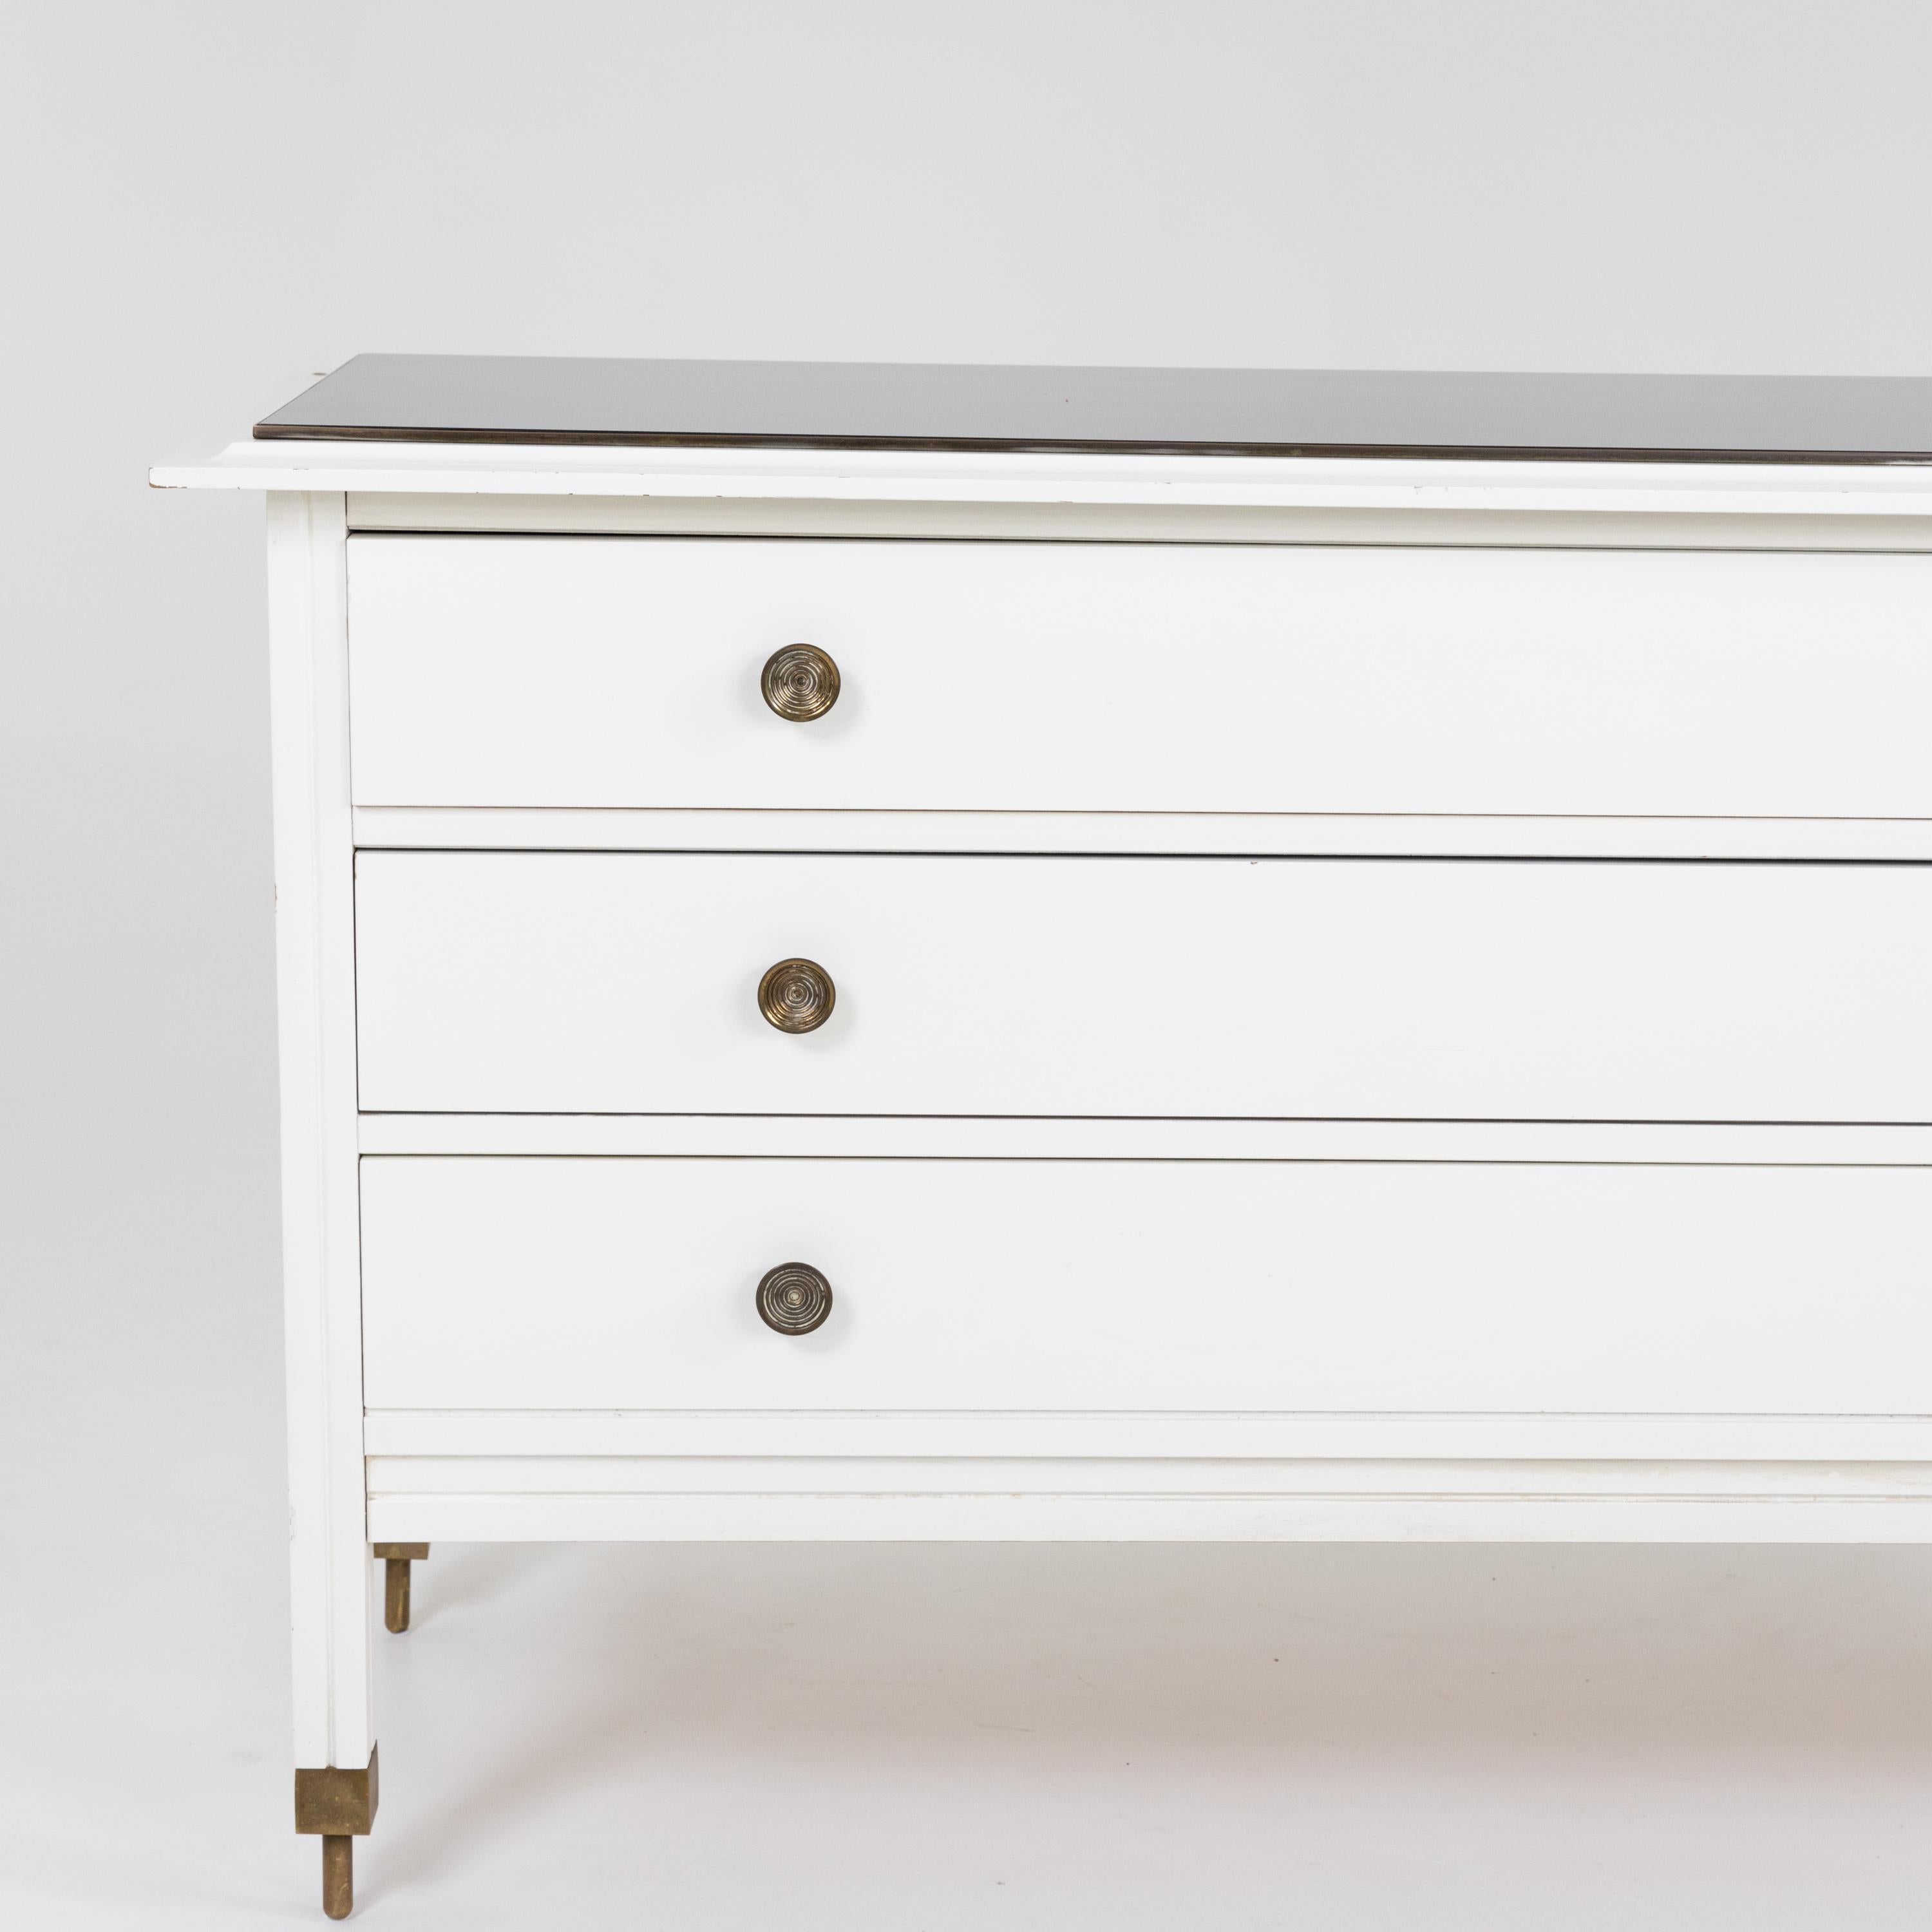 Carlo de Carli dresser with three drawers, standing on brass legs. The chest of drawers is painted in white and accented by round brass knobs and a black glass top.